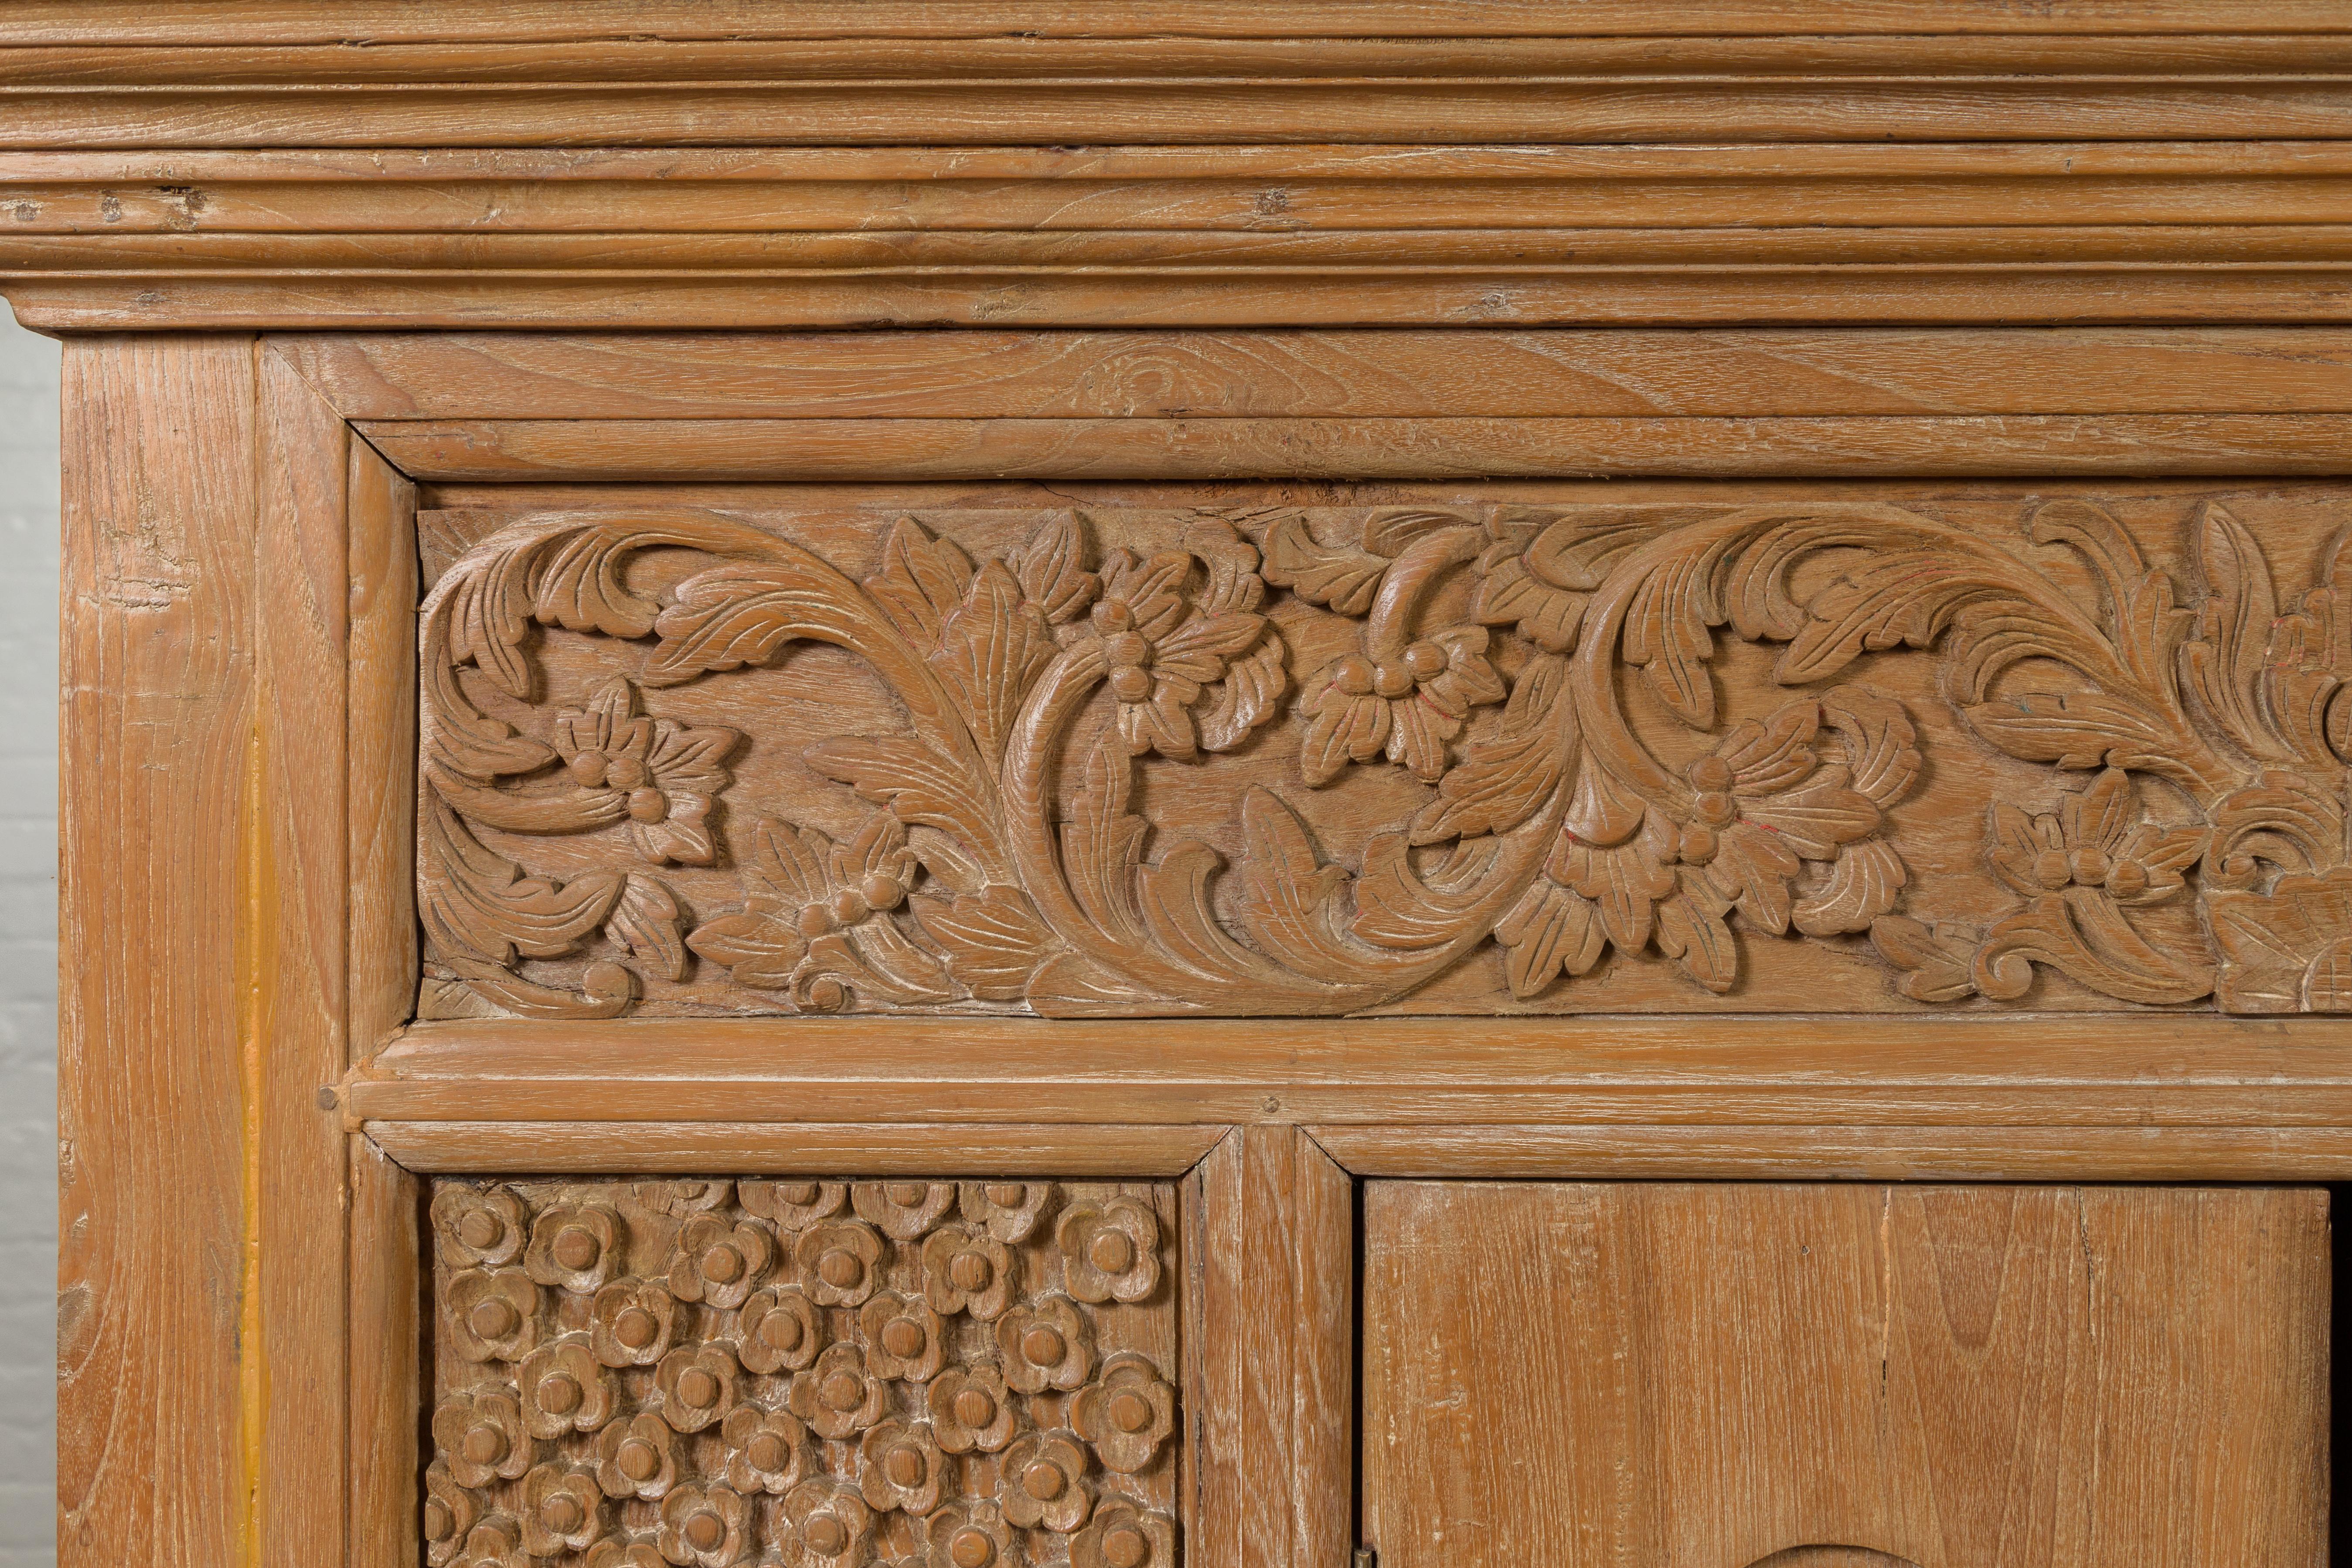 20th Century Vintage Thai Teak Cabinet with Carved Floral Decor, Two Doors and Tapered Legs